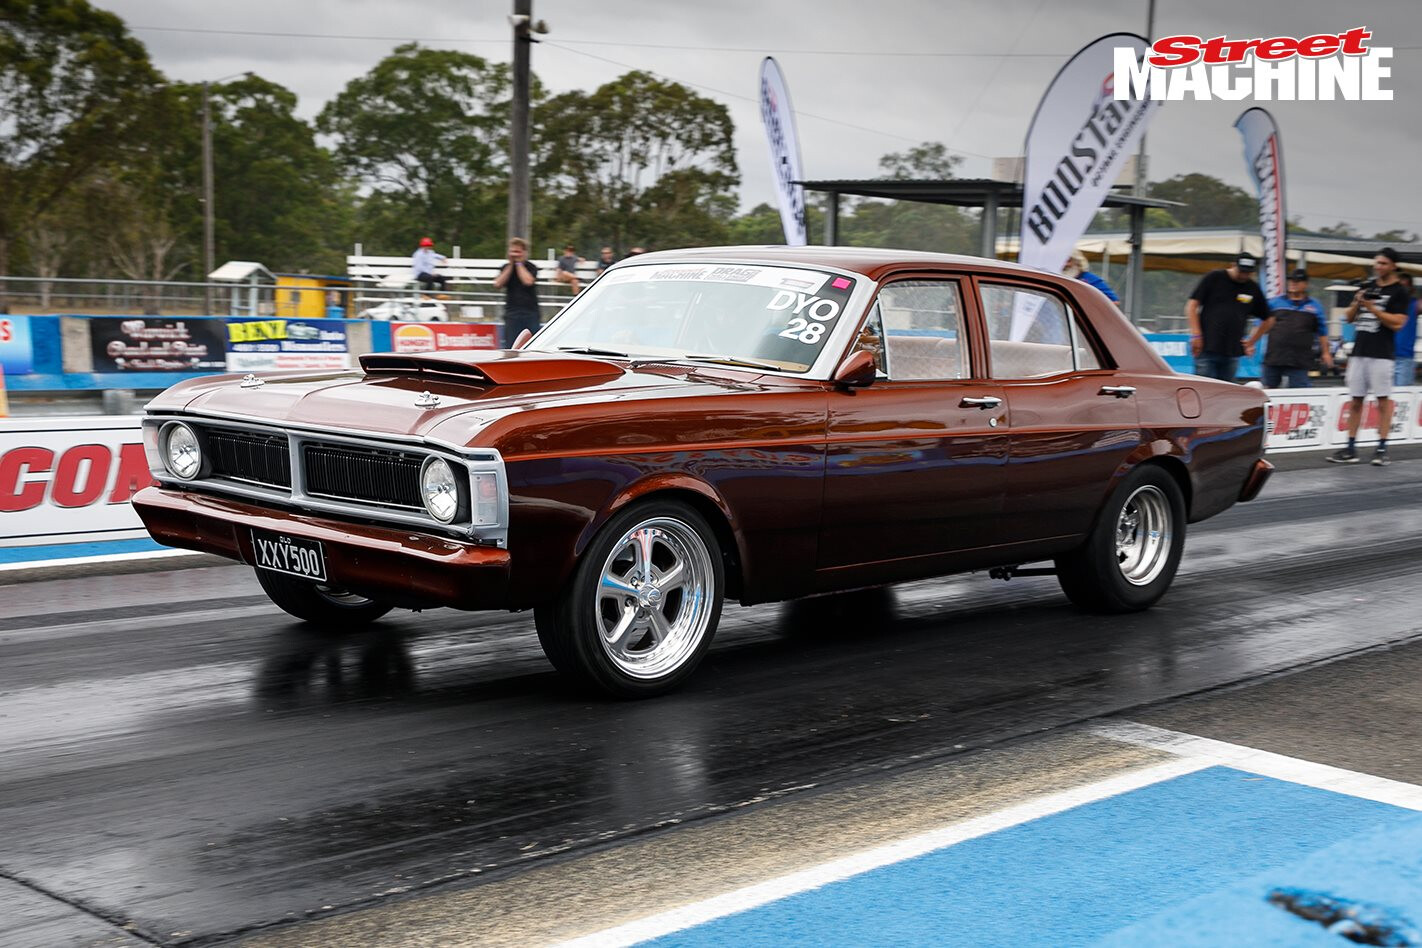 LS1-powered XY Falcon at Drag Challenge Weekend 2018 – Video